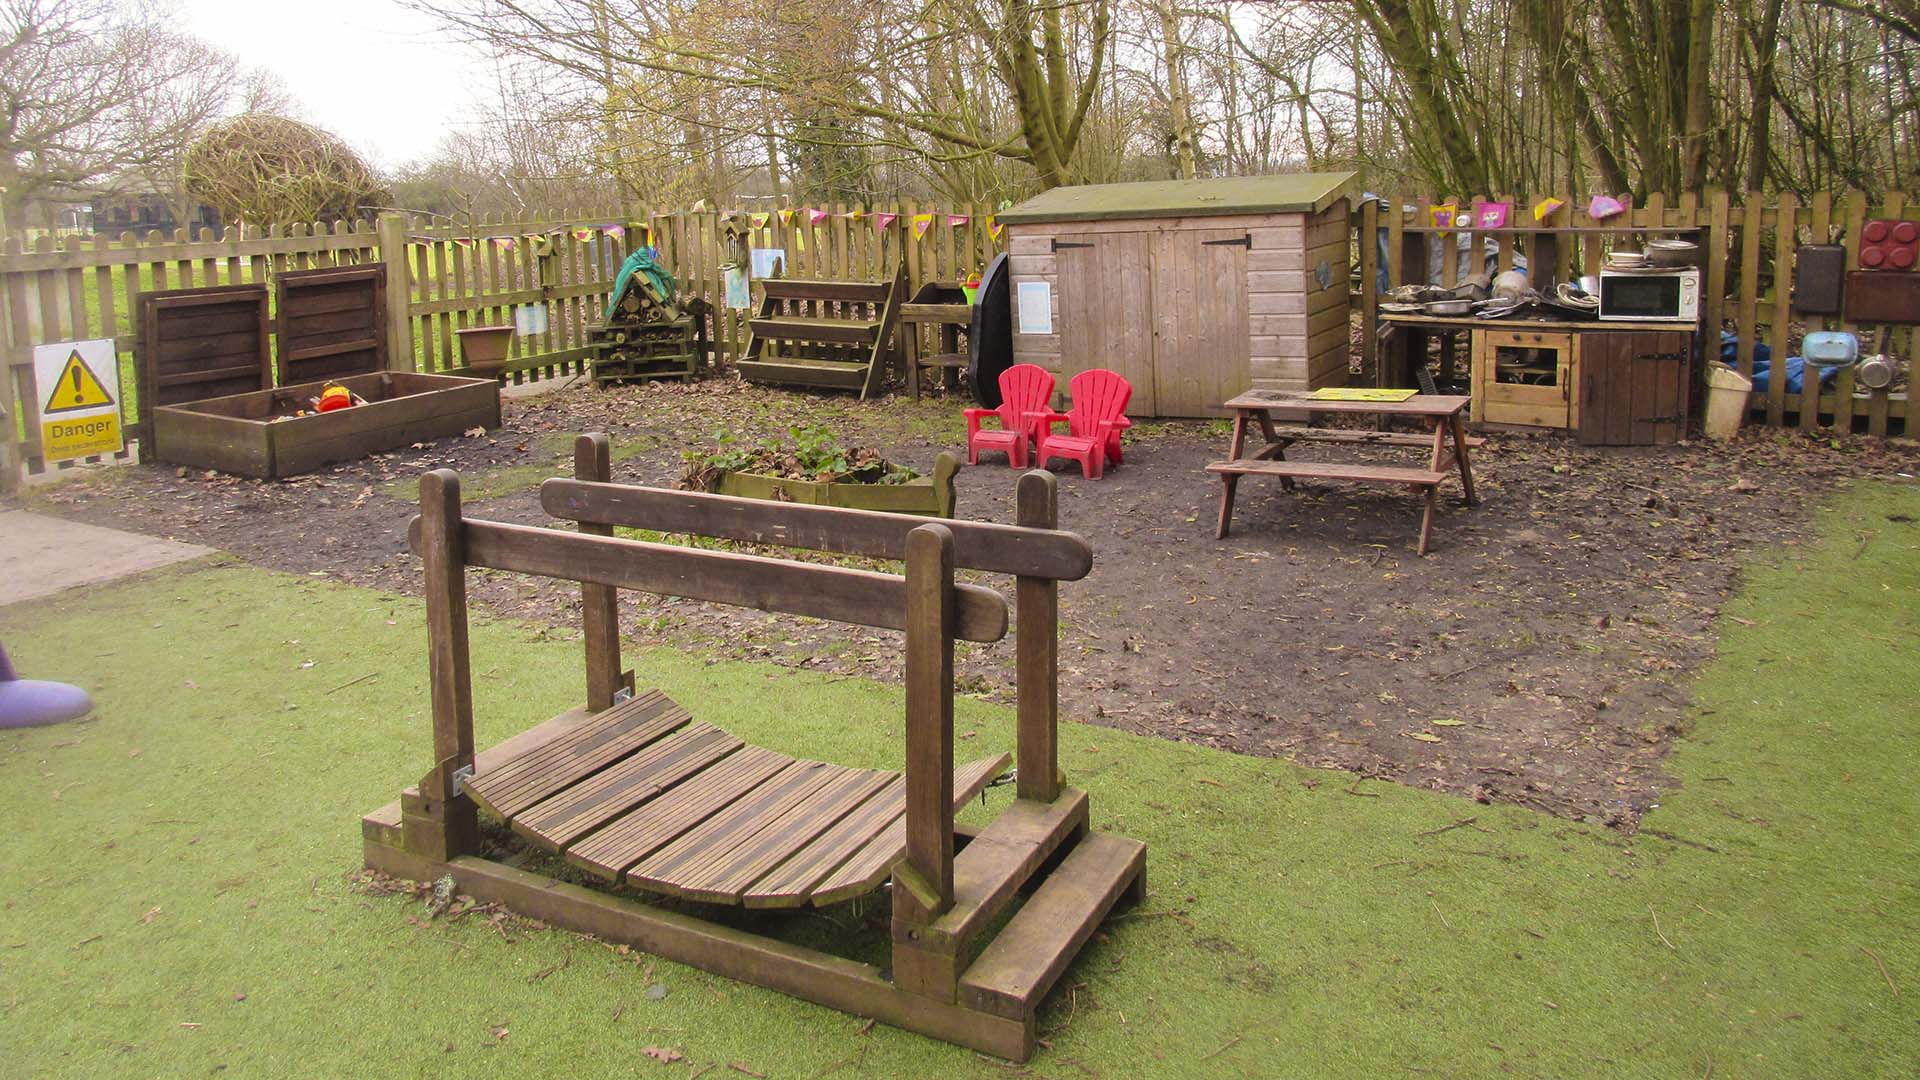 The pre-school 'natural area' featuring digging box, bug hotel, potting shed, and mud kitchen.